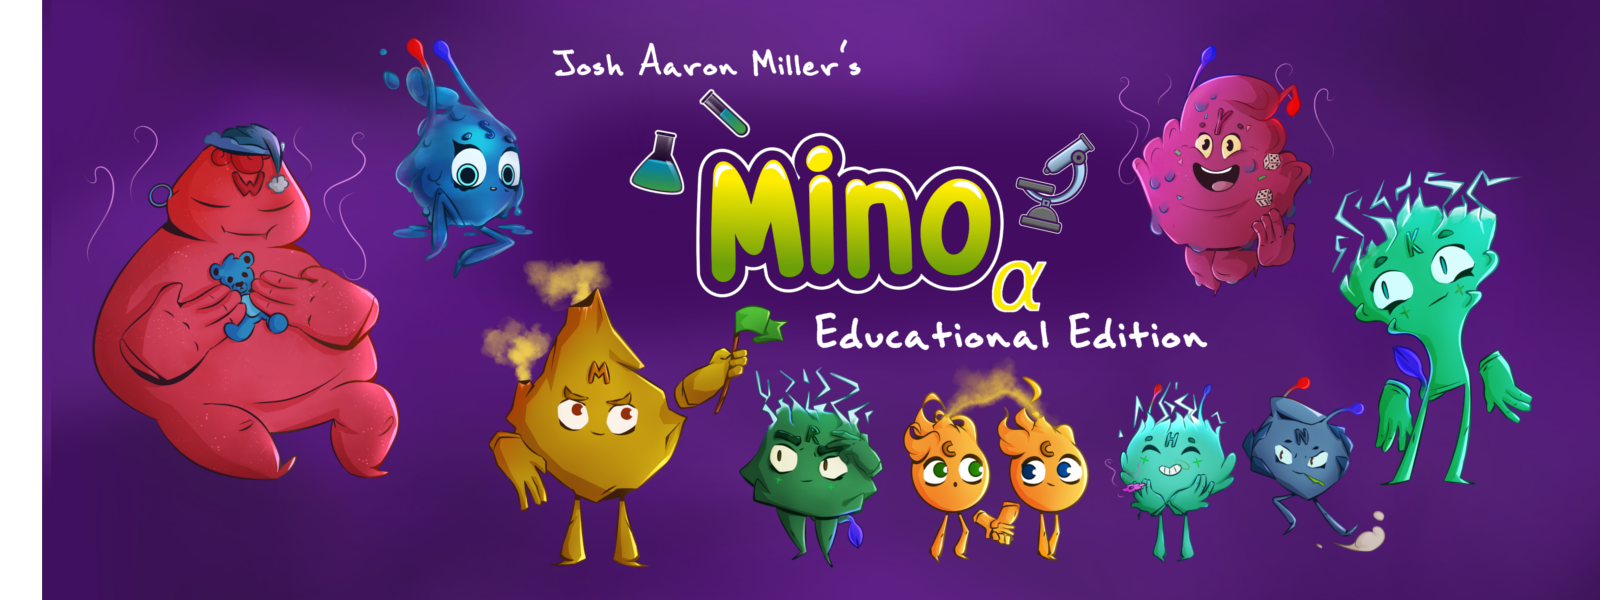 Expanded logo of Mino showing amino acids as cartoon characters.